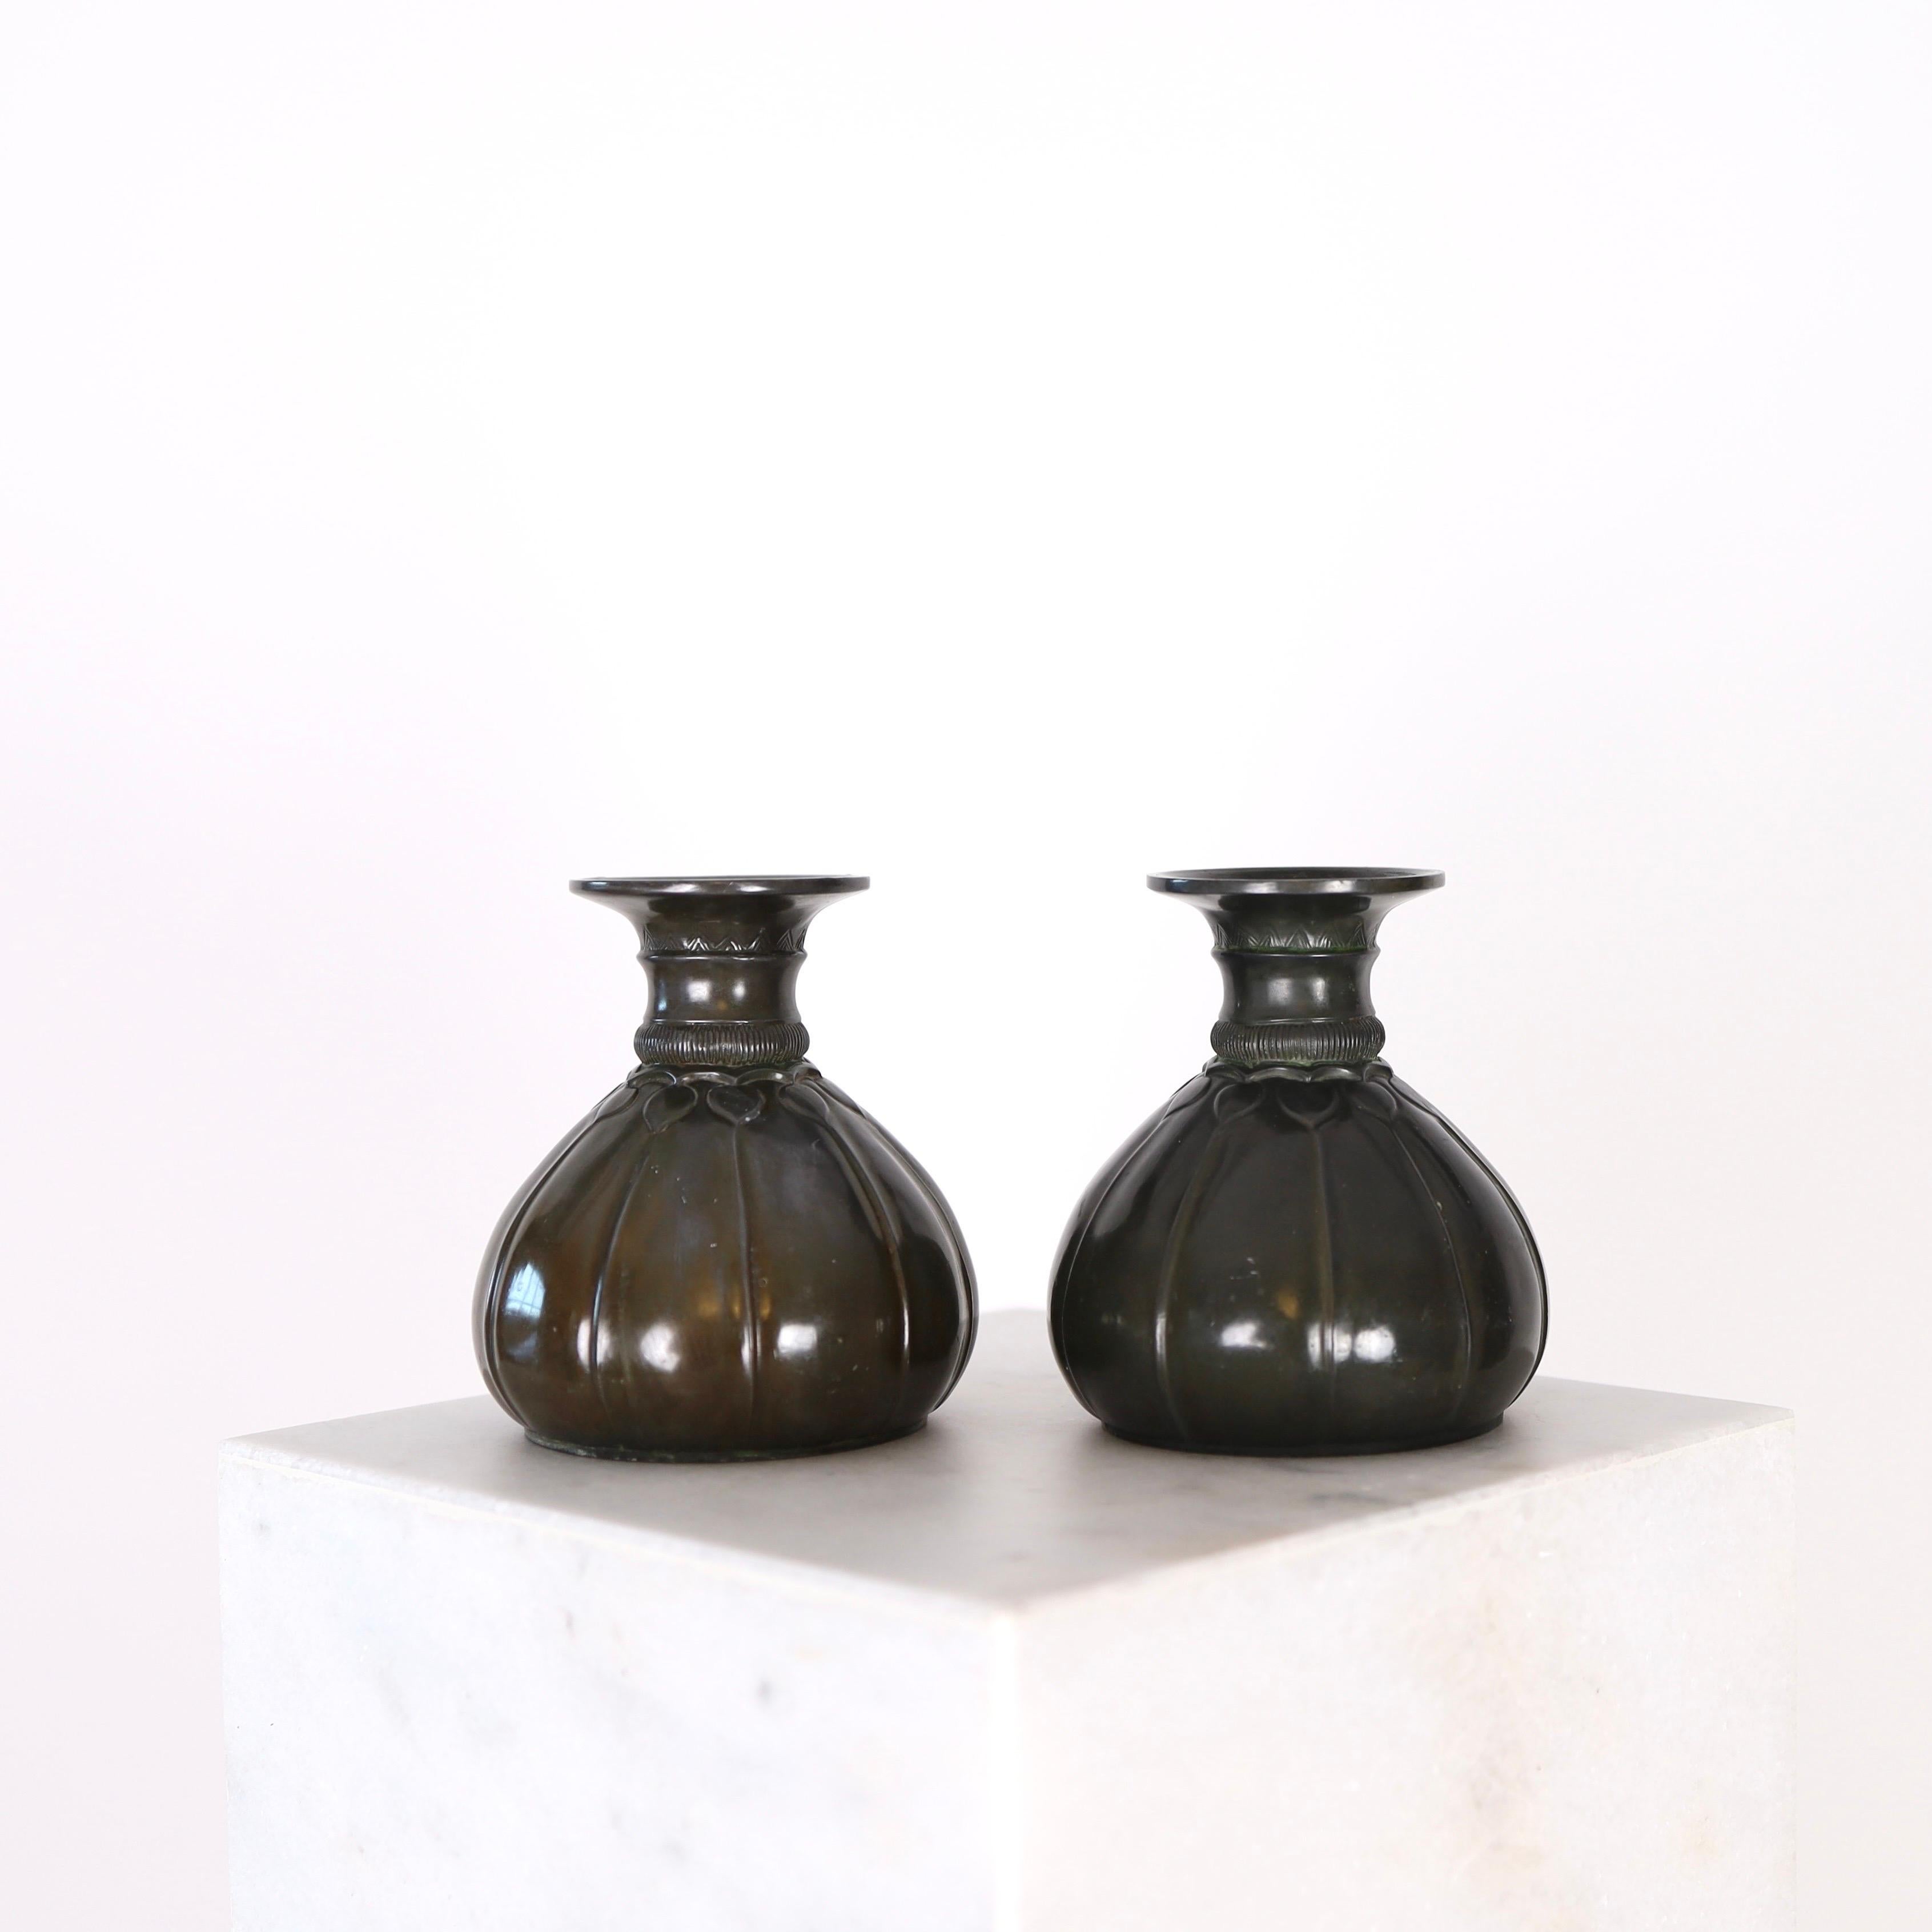 A rare set of metal vases designed by Just Andersen in 1920s. These early-work pieces by Just Andersen are in very good vintage condition and a true testament to the Danish design heritage and craftmanship. 
 
* A pair of metal vases 
* Designer: